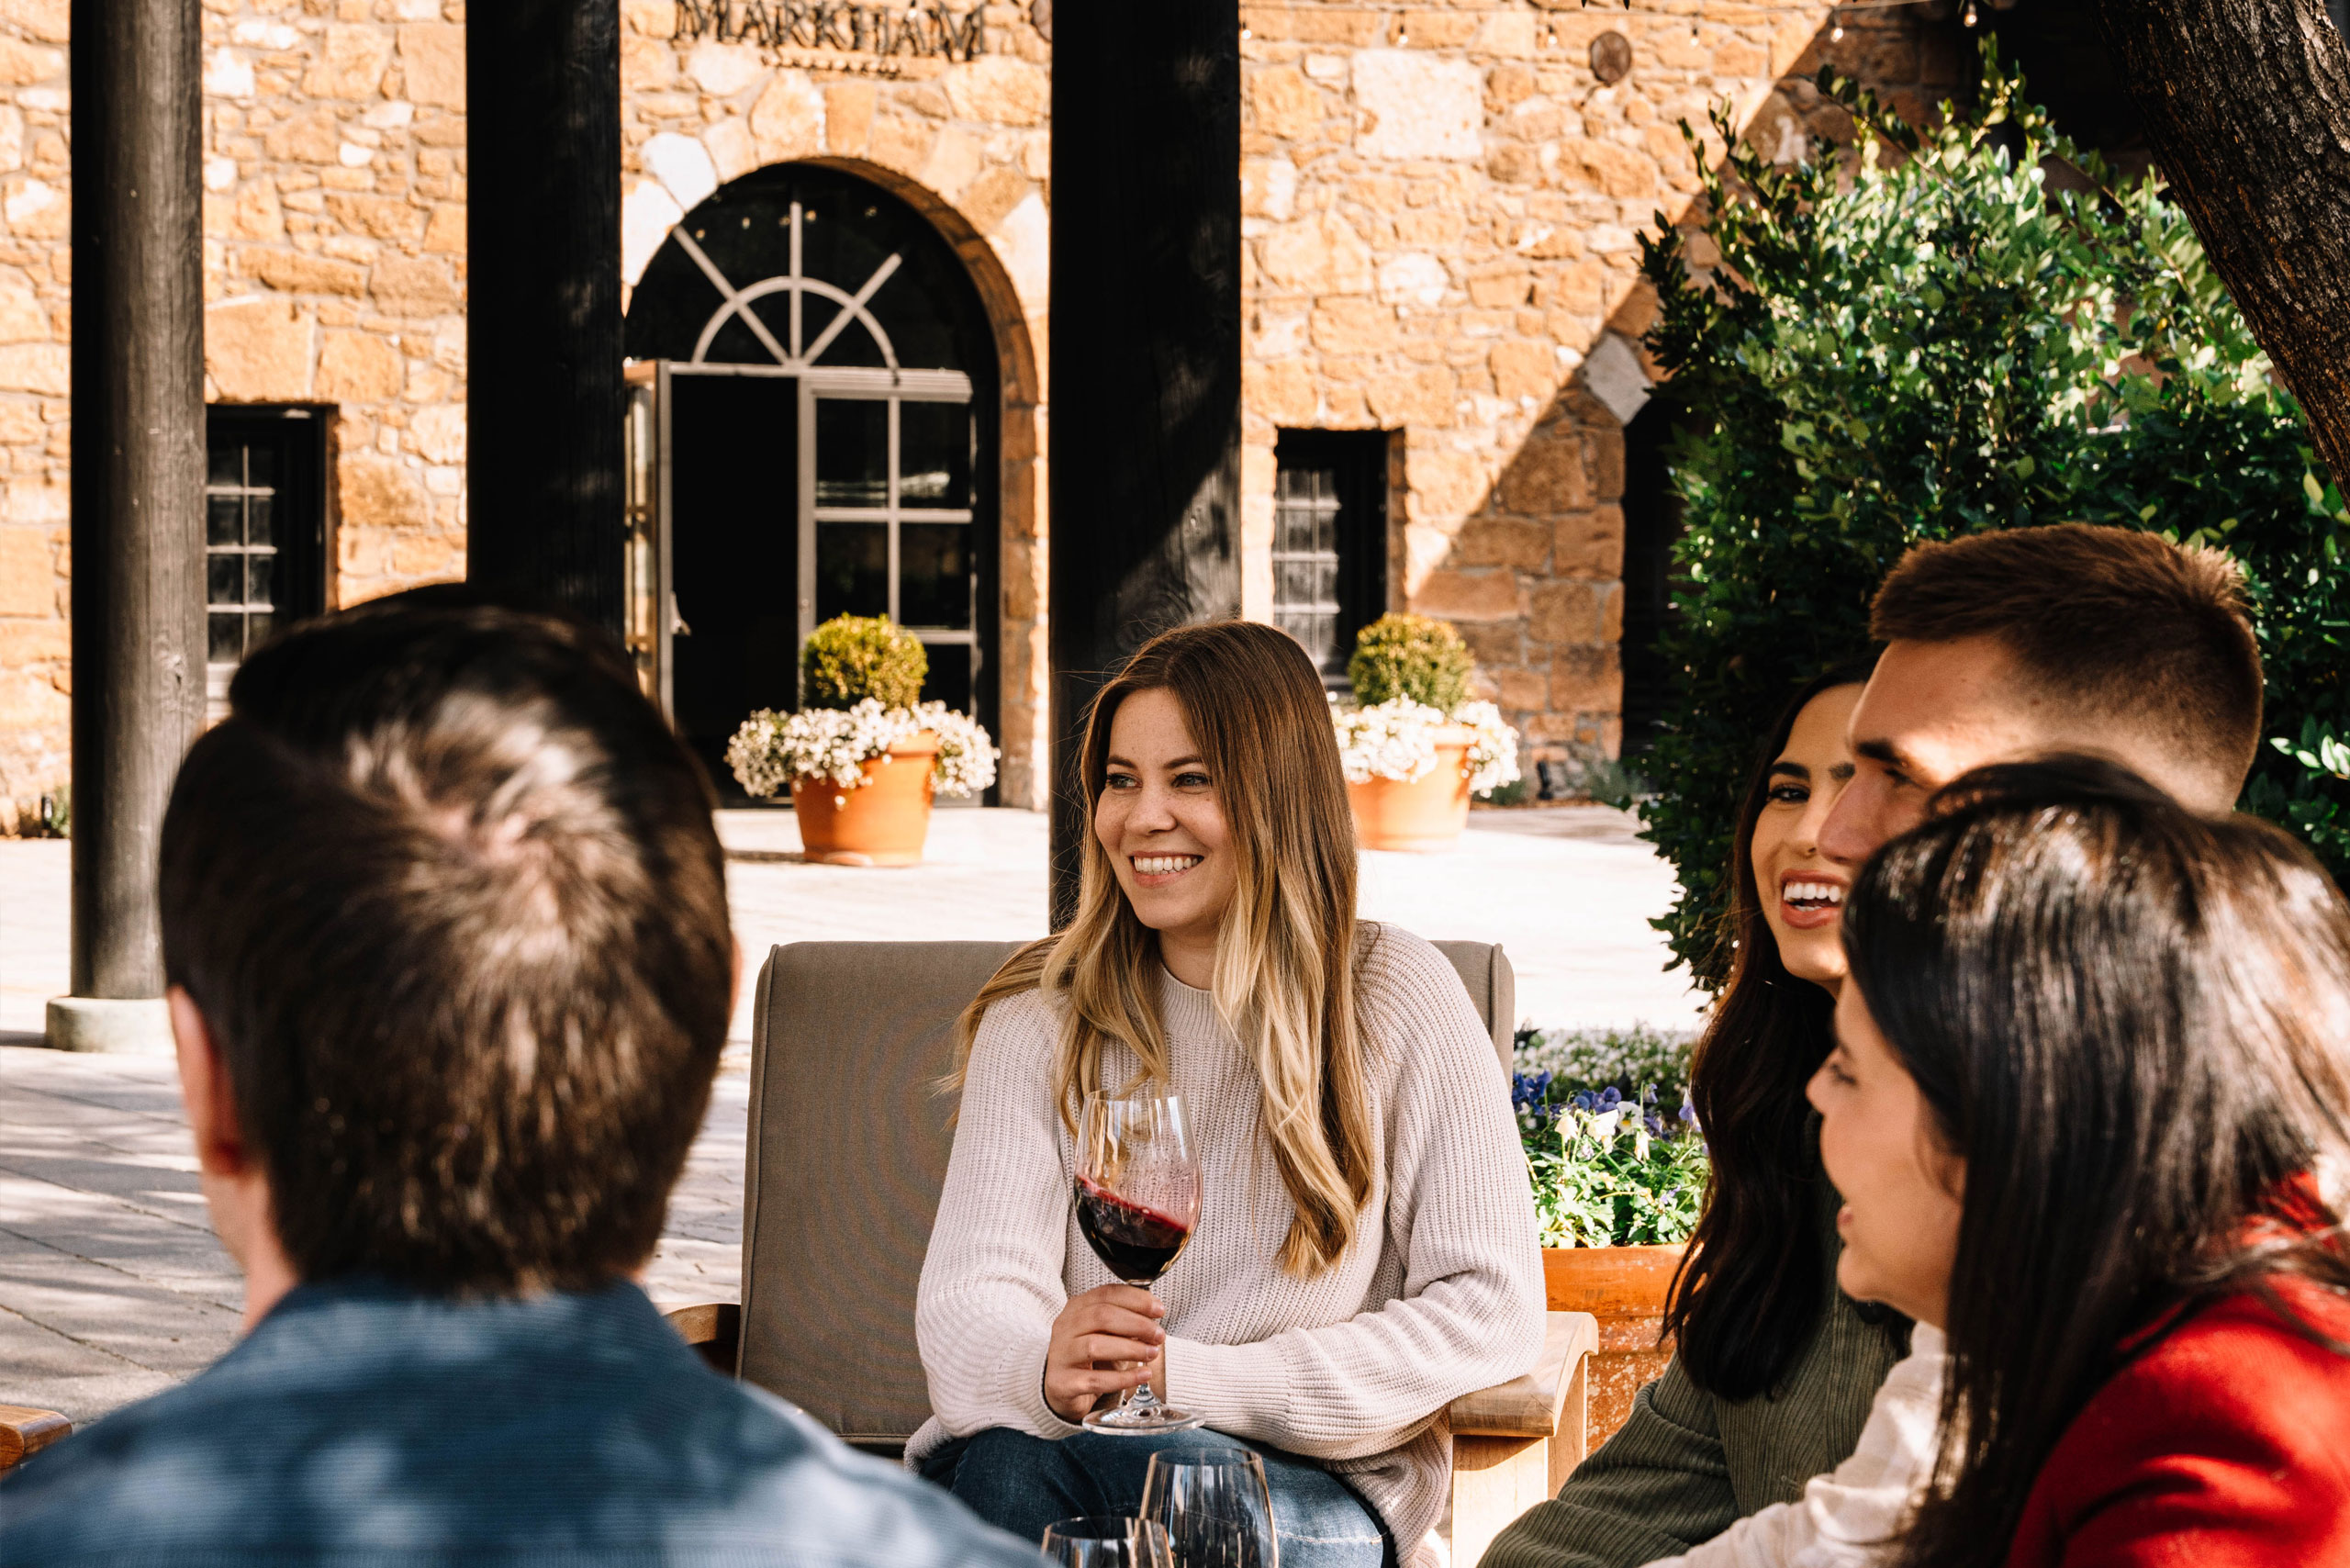 Group of people tasting wine with the Markham Stone Cellar in the background